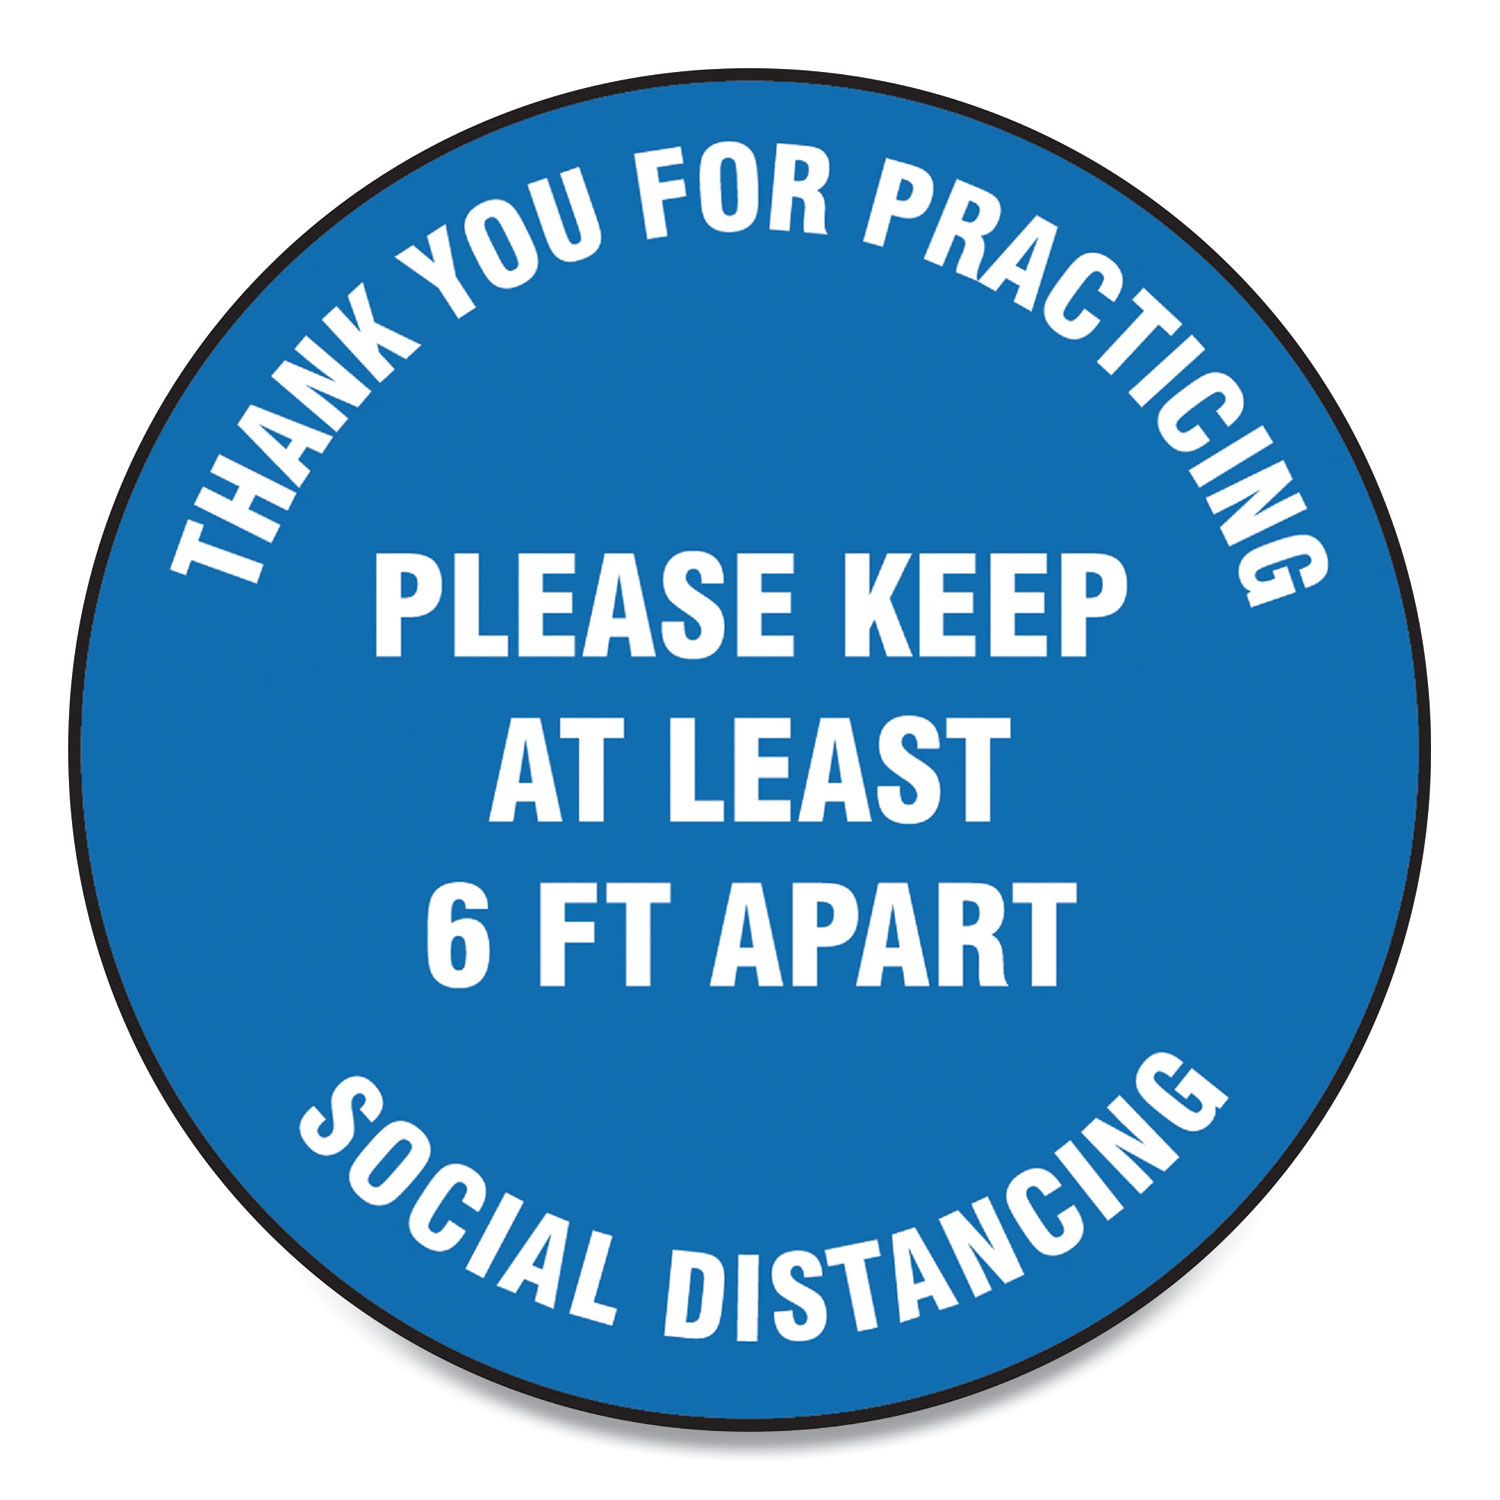 Accuform® Slip-Gard Floor Signs, 17 Circle, Thank You For Practicing Social Distancing Please Keep At Least 6 ft Apart, Blue, 25/PK